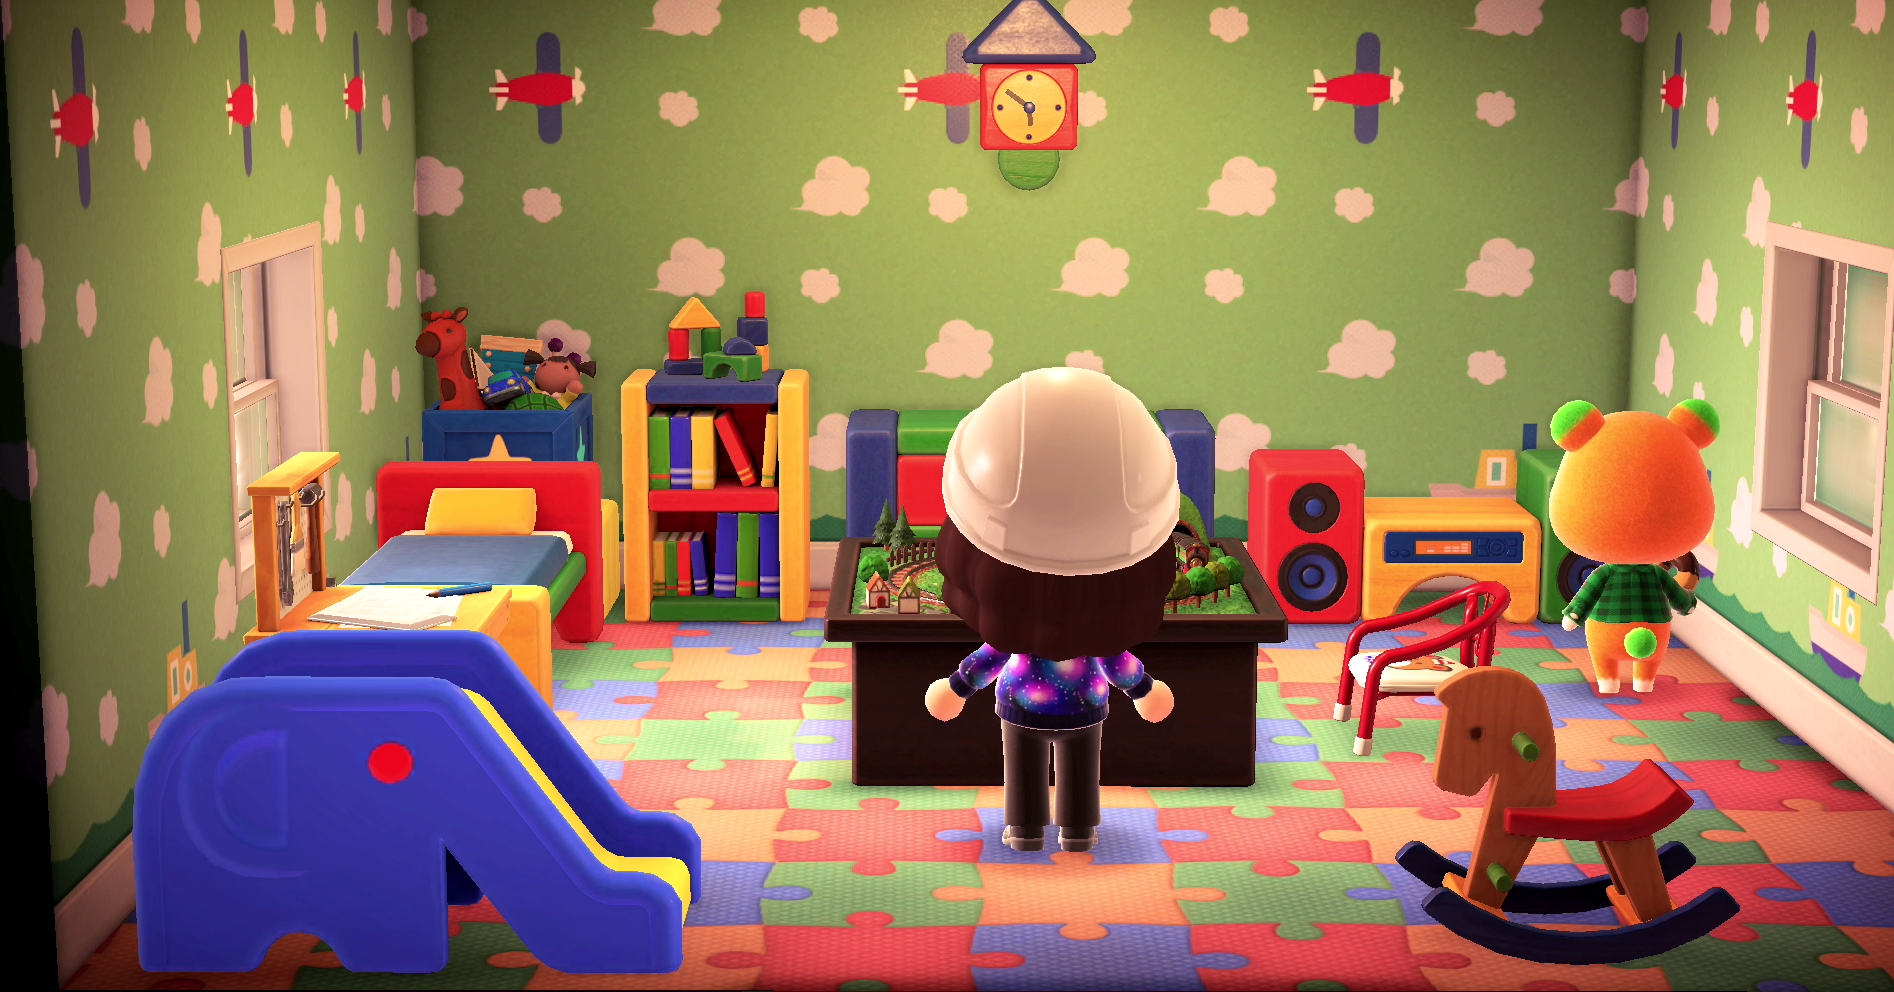 Interior of Pudge's house in Animal Crossing: New Horizons